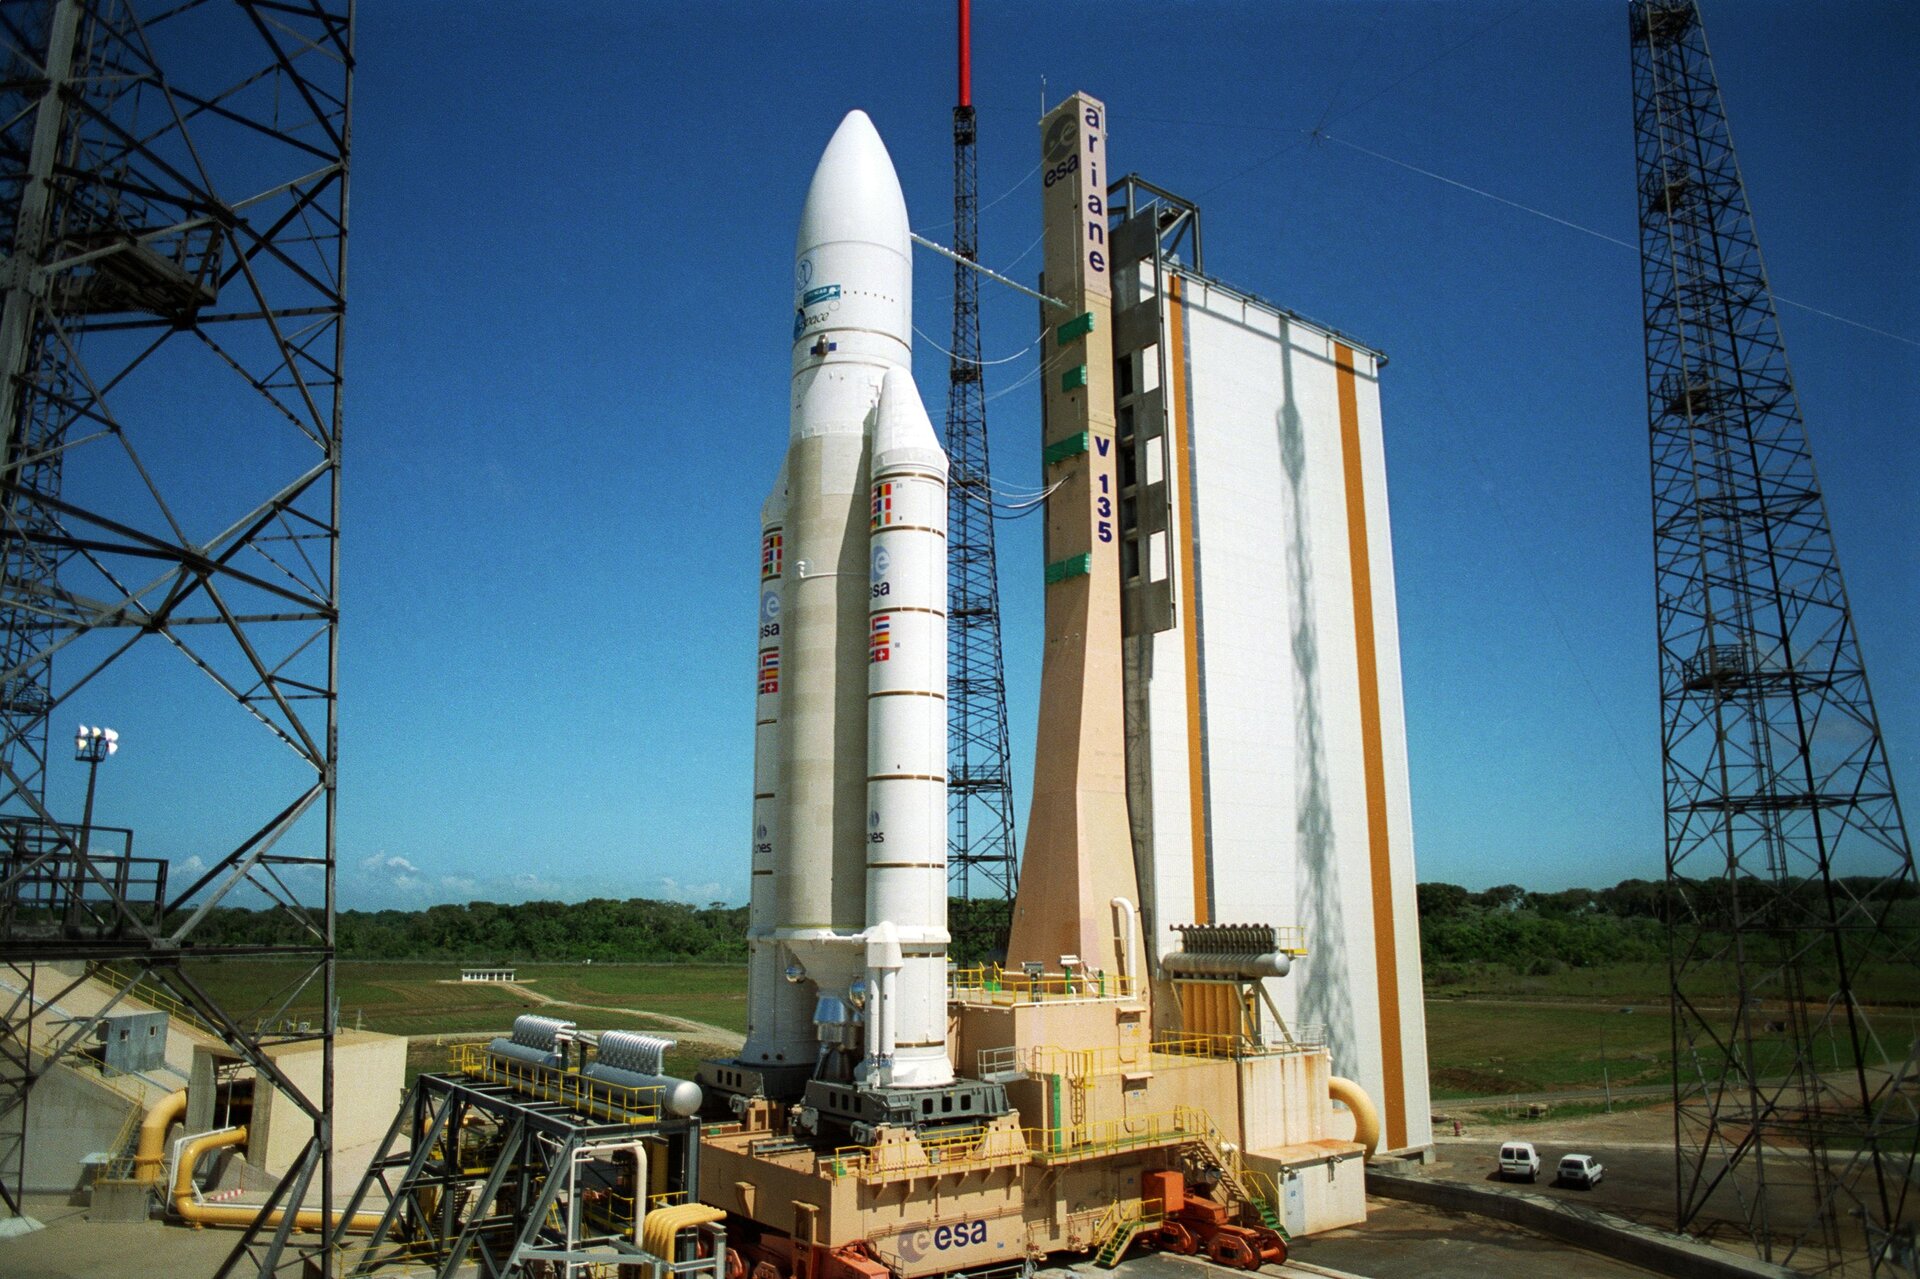 Ariane 507, V135 on the launch pad